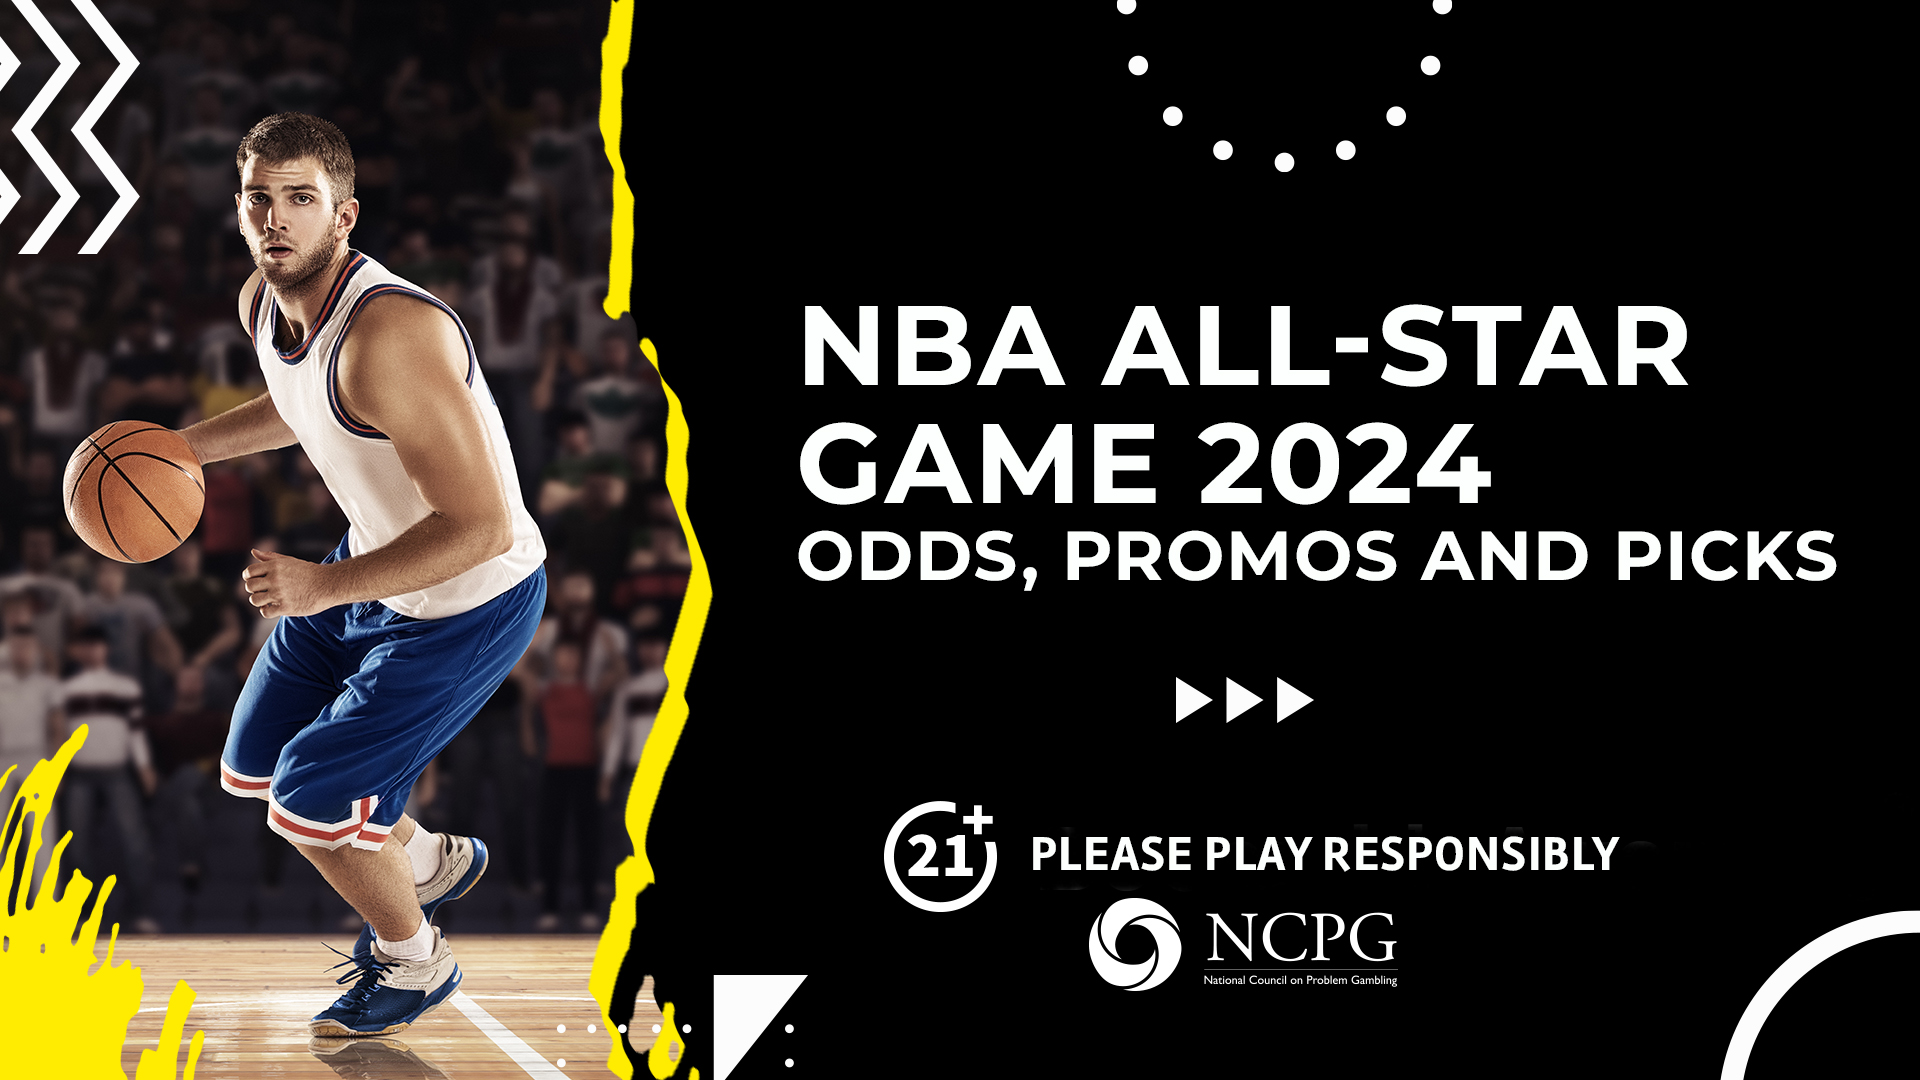 Photo: nba all star game odds